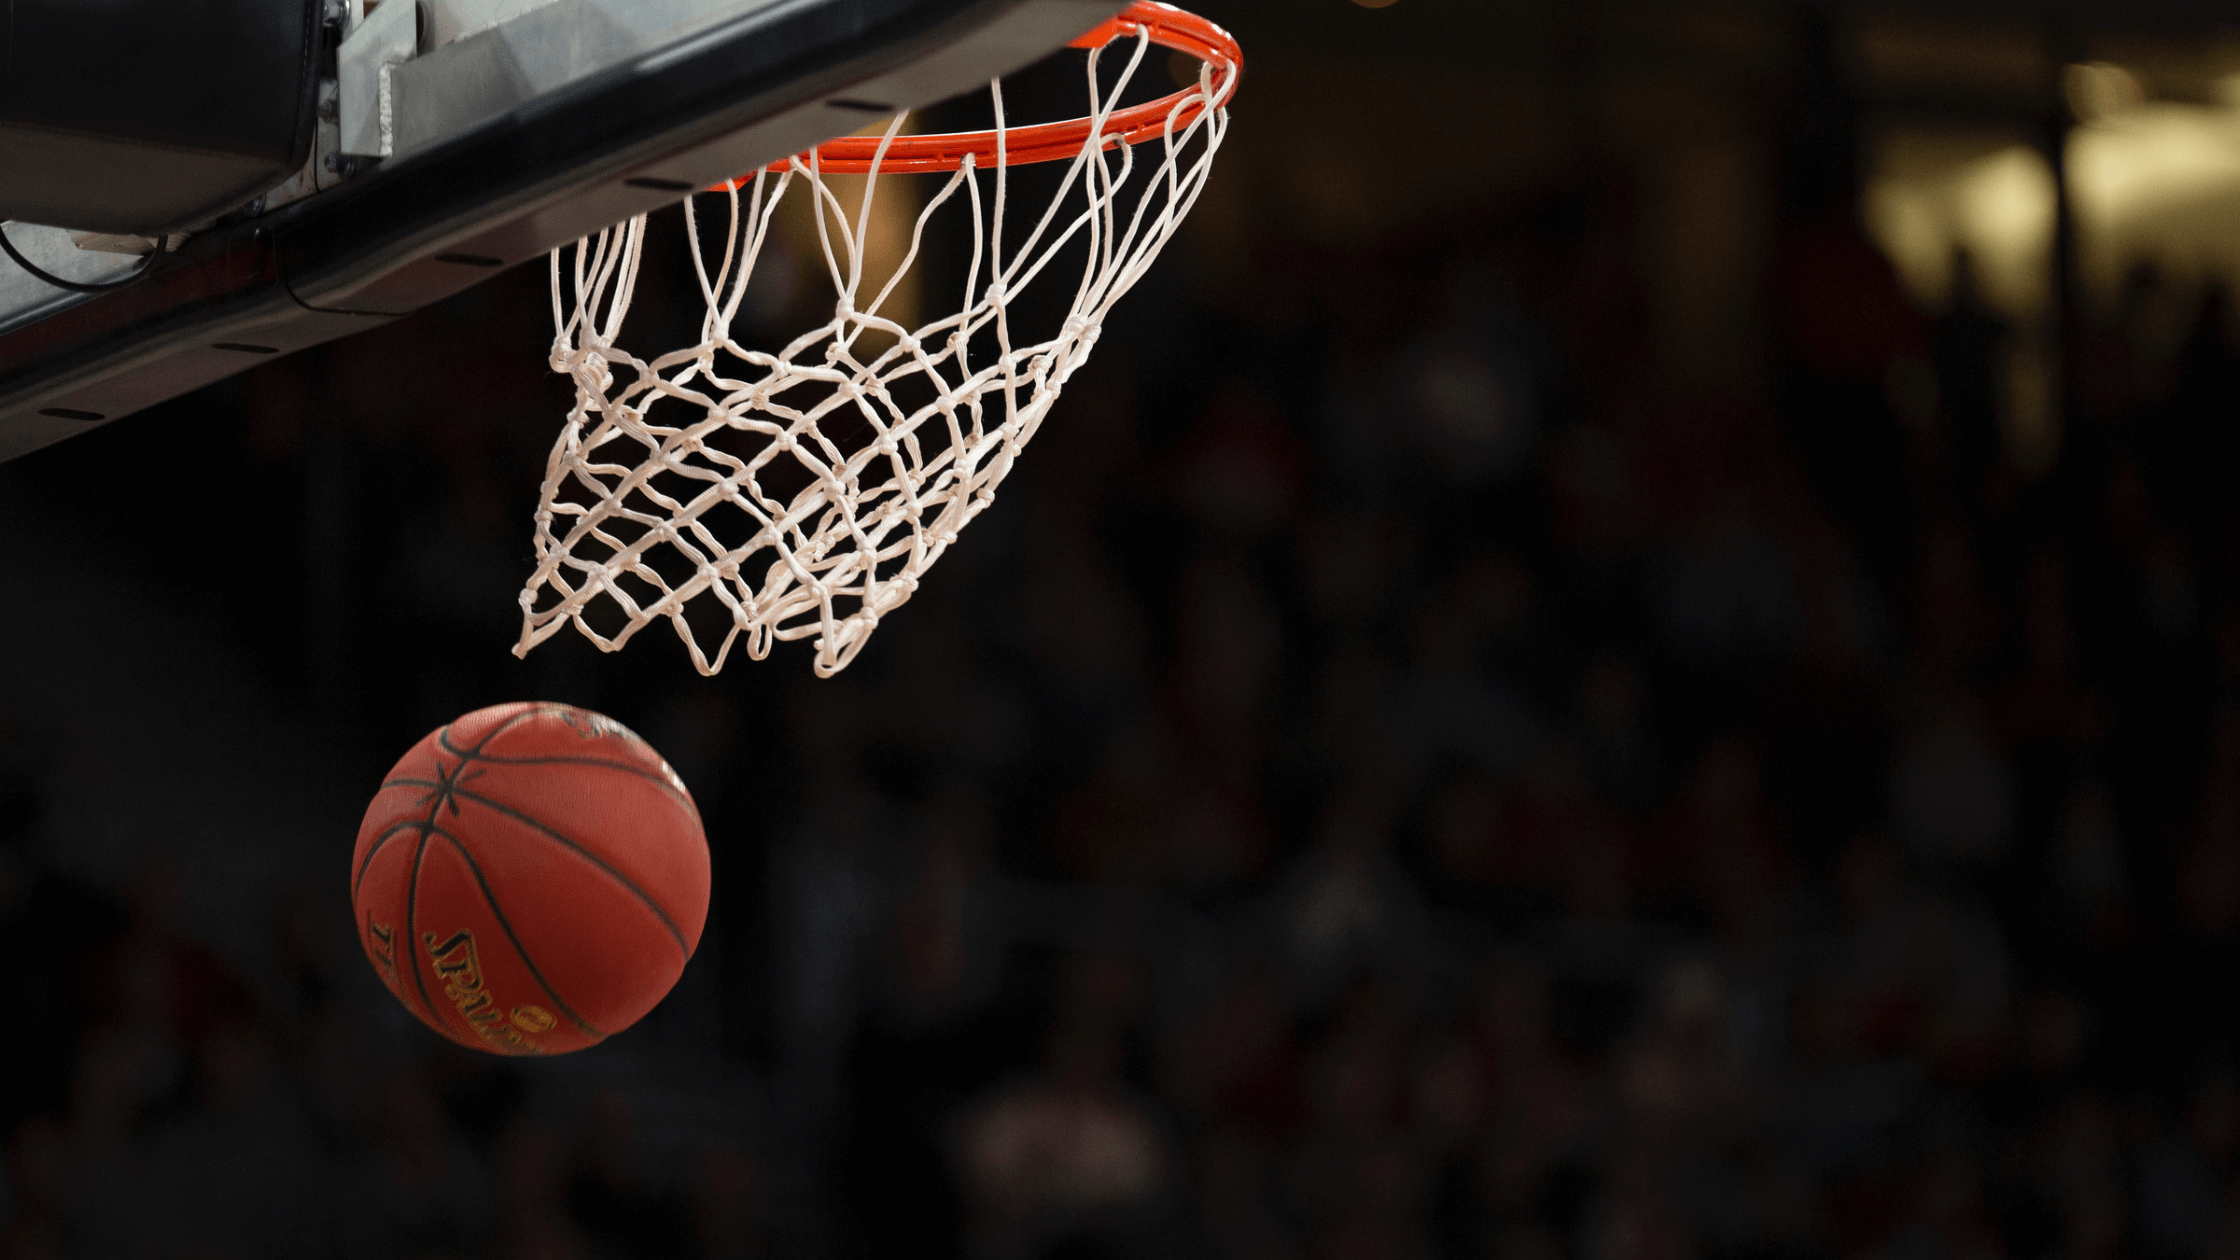 March Madness: The Top 5 Basketball Injuries and How To Prevent Them